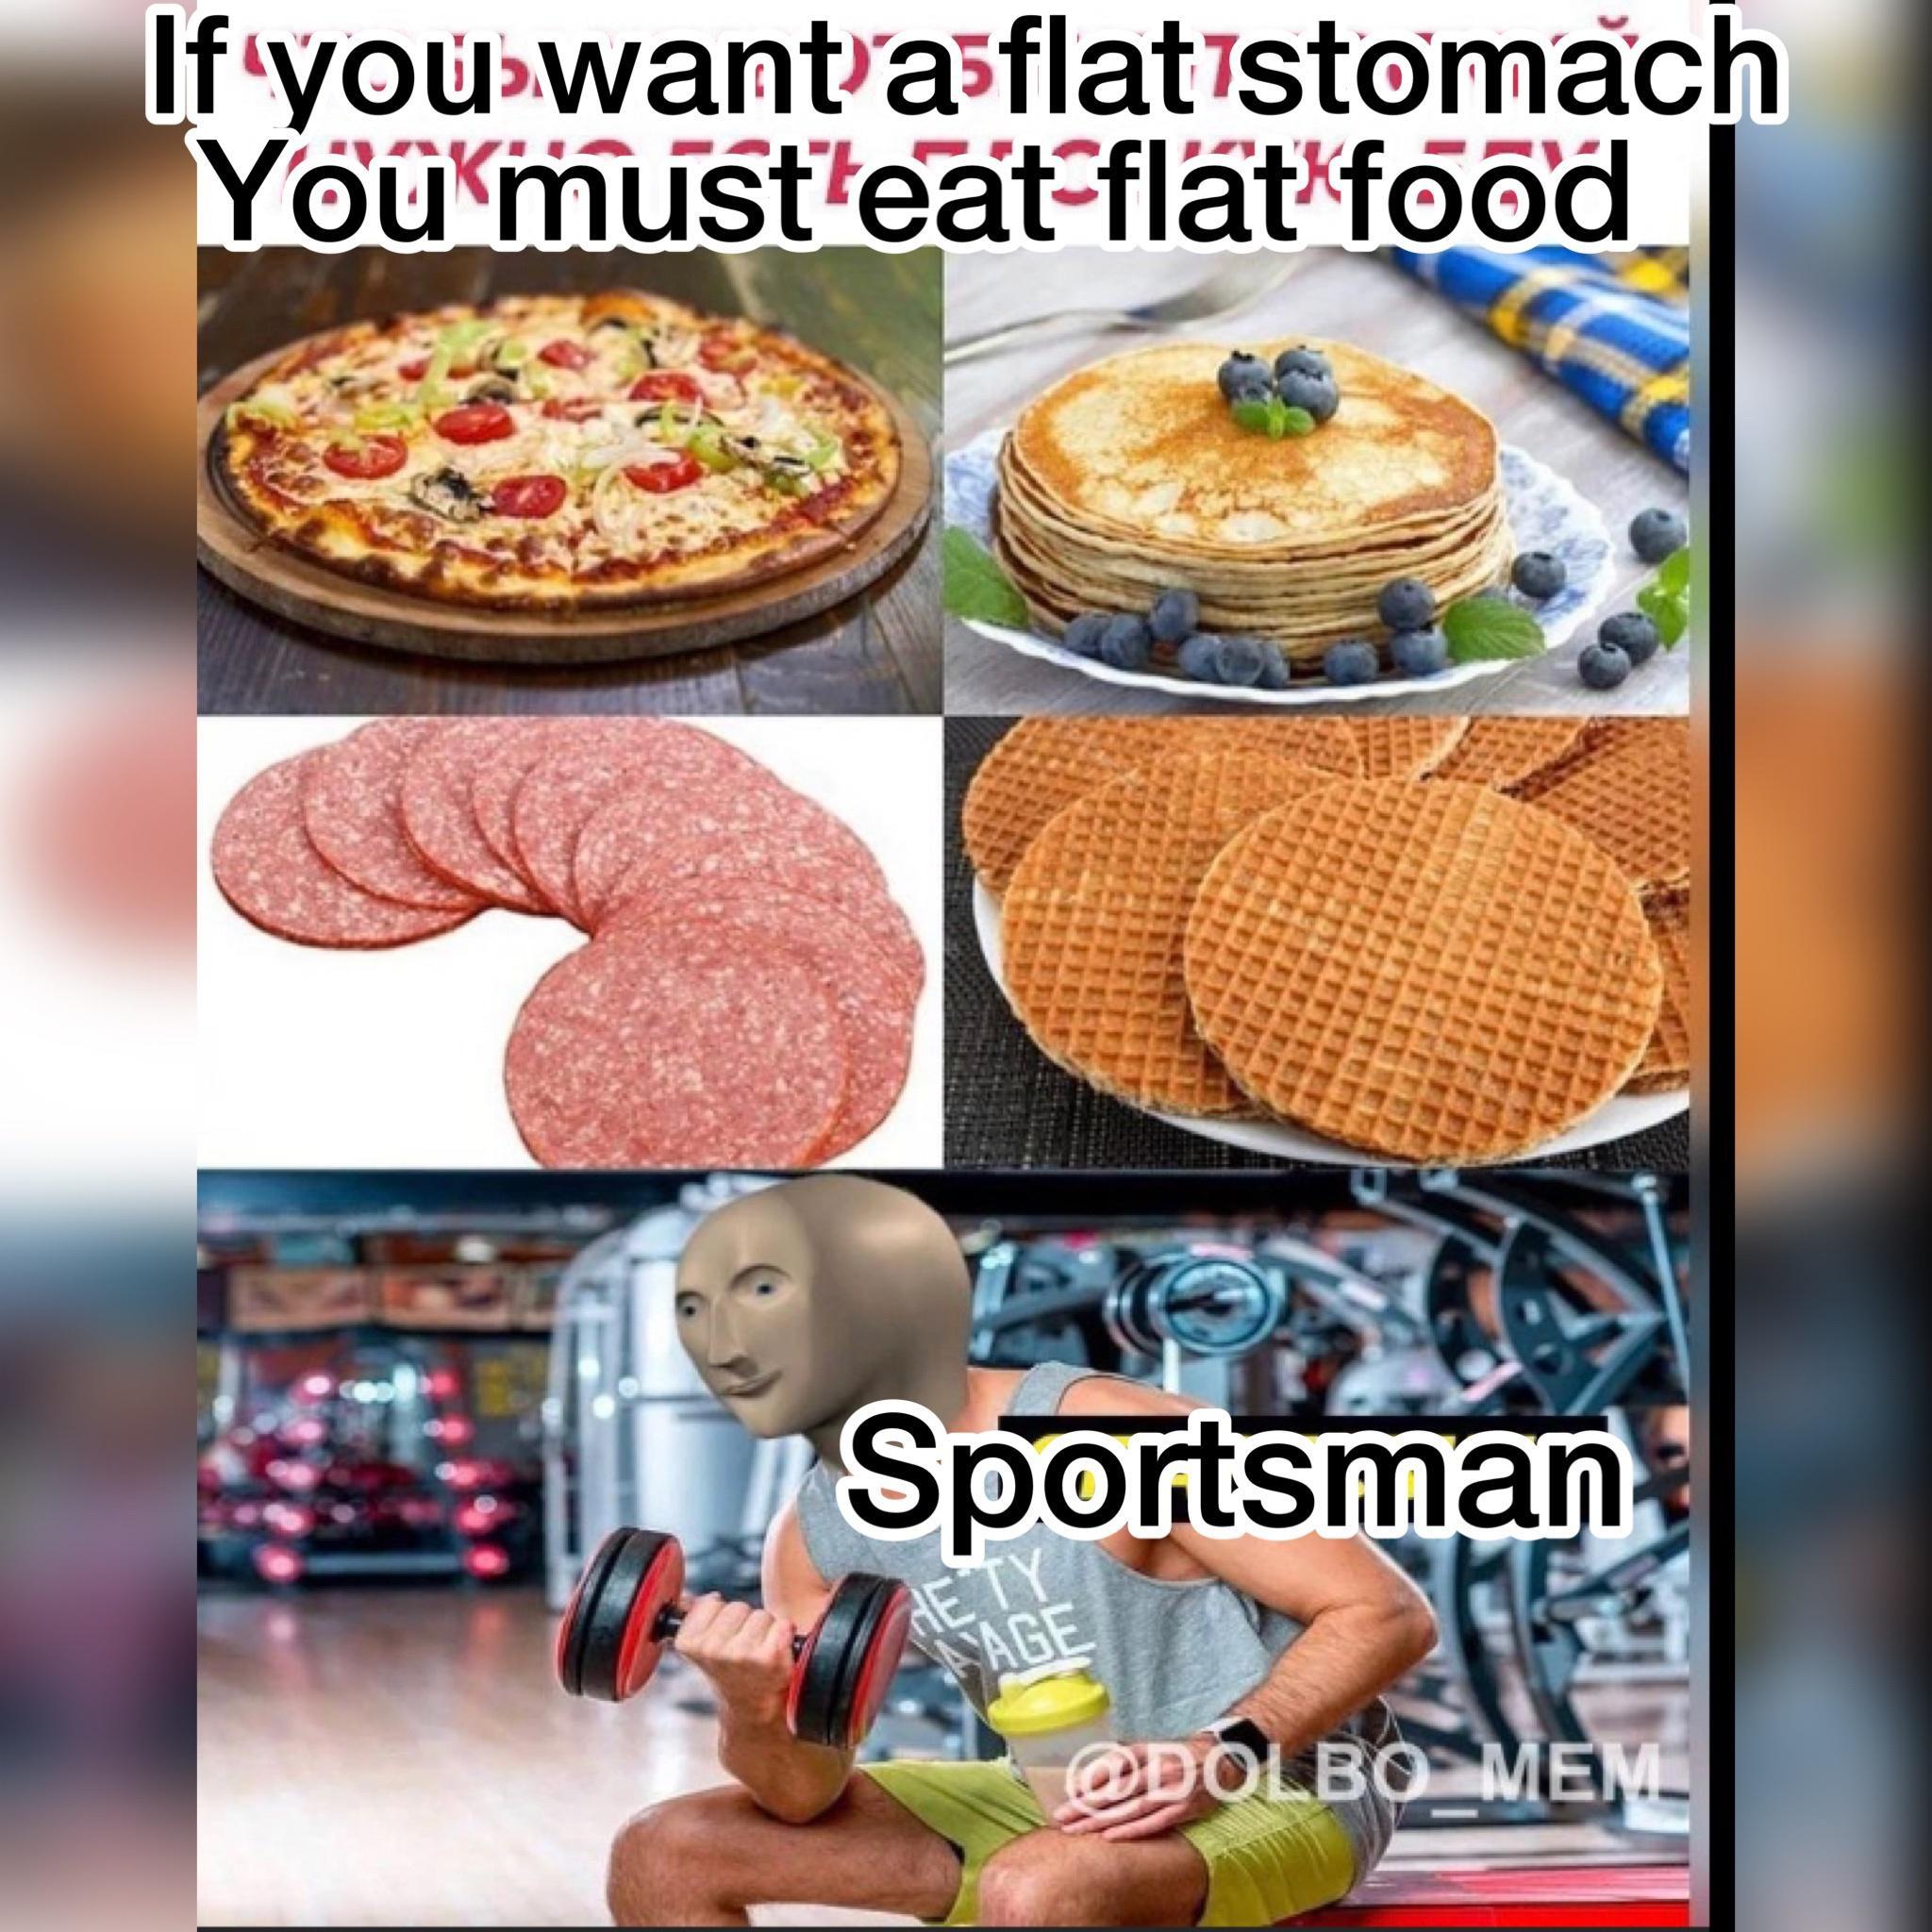 fresh memes - junk food - If you want a flat stomach You must eat flat food Sportsman Age